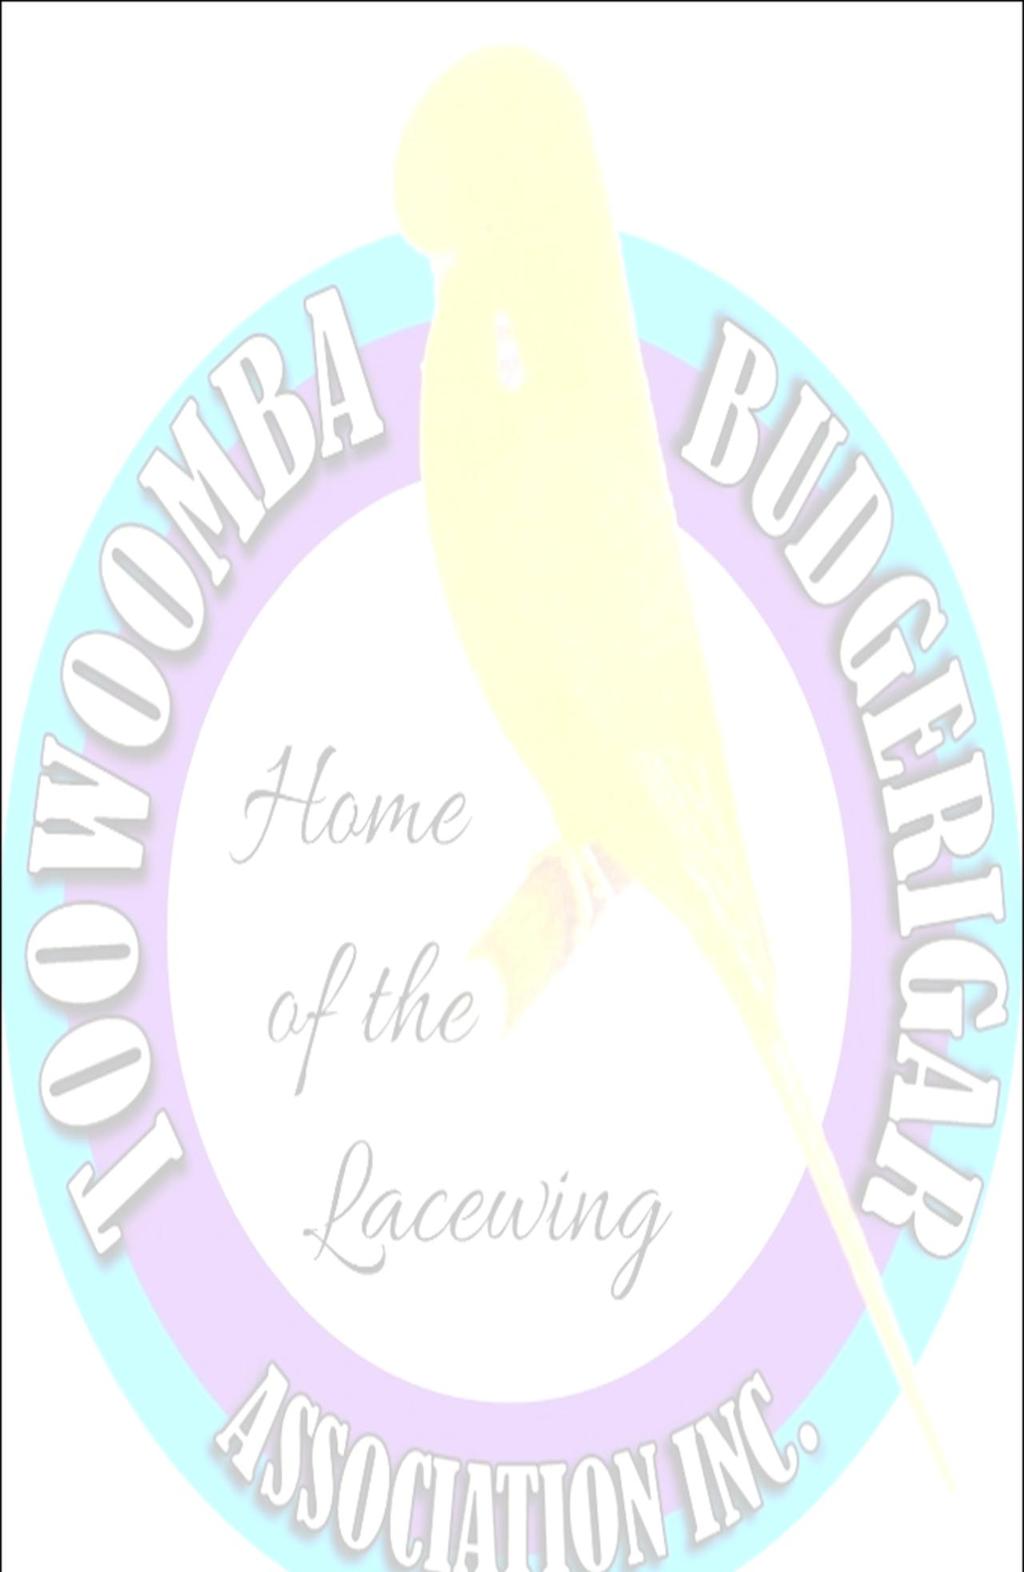 TOOWOOMBA Budgerigar Association ANNUAL SHOW SCHEDULE March 29 th 2015 Cocks Hens No OB YB NF OB YB NF No 1 Normal Light Green 2 3 Normal Dark or Olive Green 4 5 Normal Grey Green 6 7 Normal Sky Blue